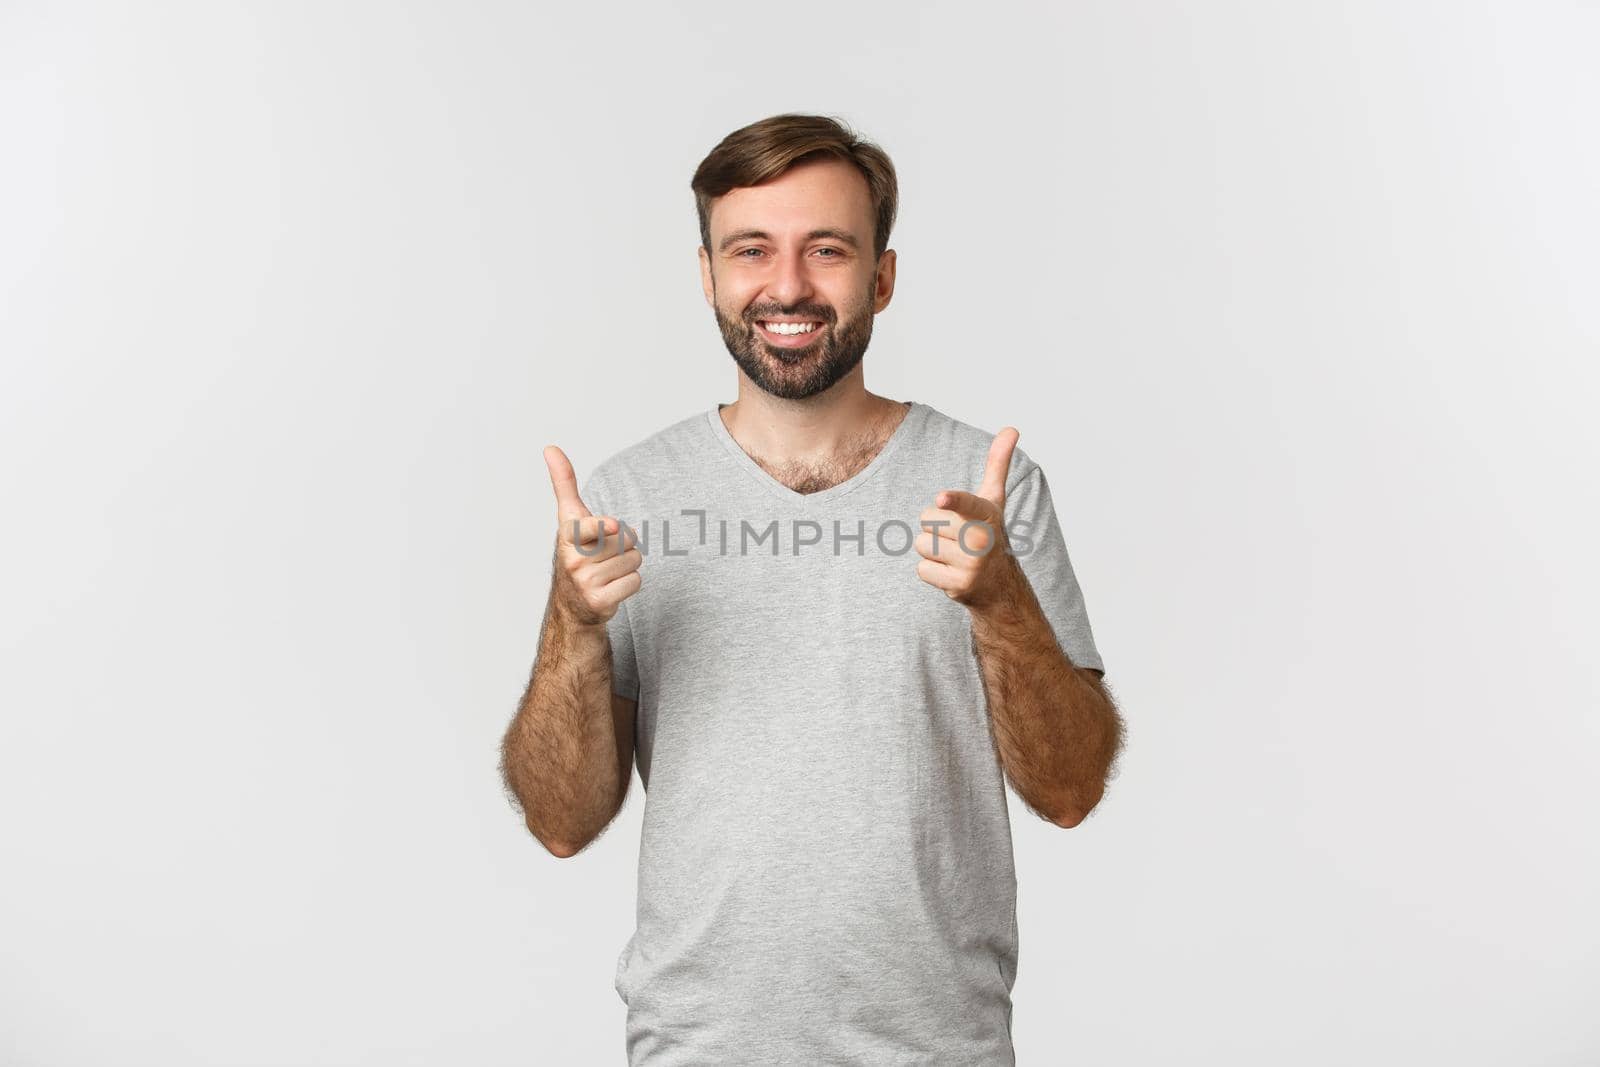 Image of satisfied smiling man in gray t-shirt, showing thumbs-up in approval, like something good, white background.